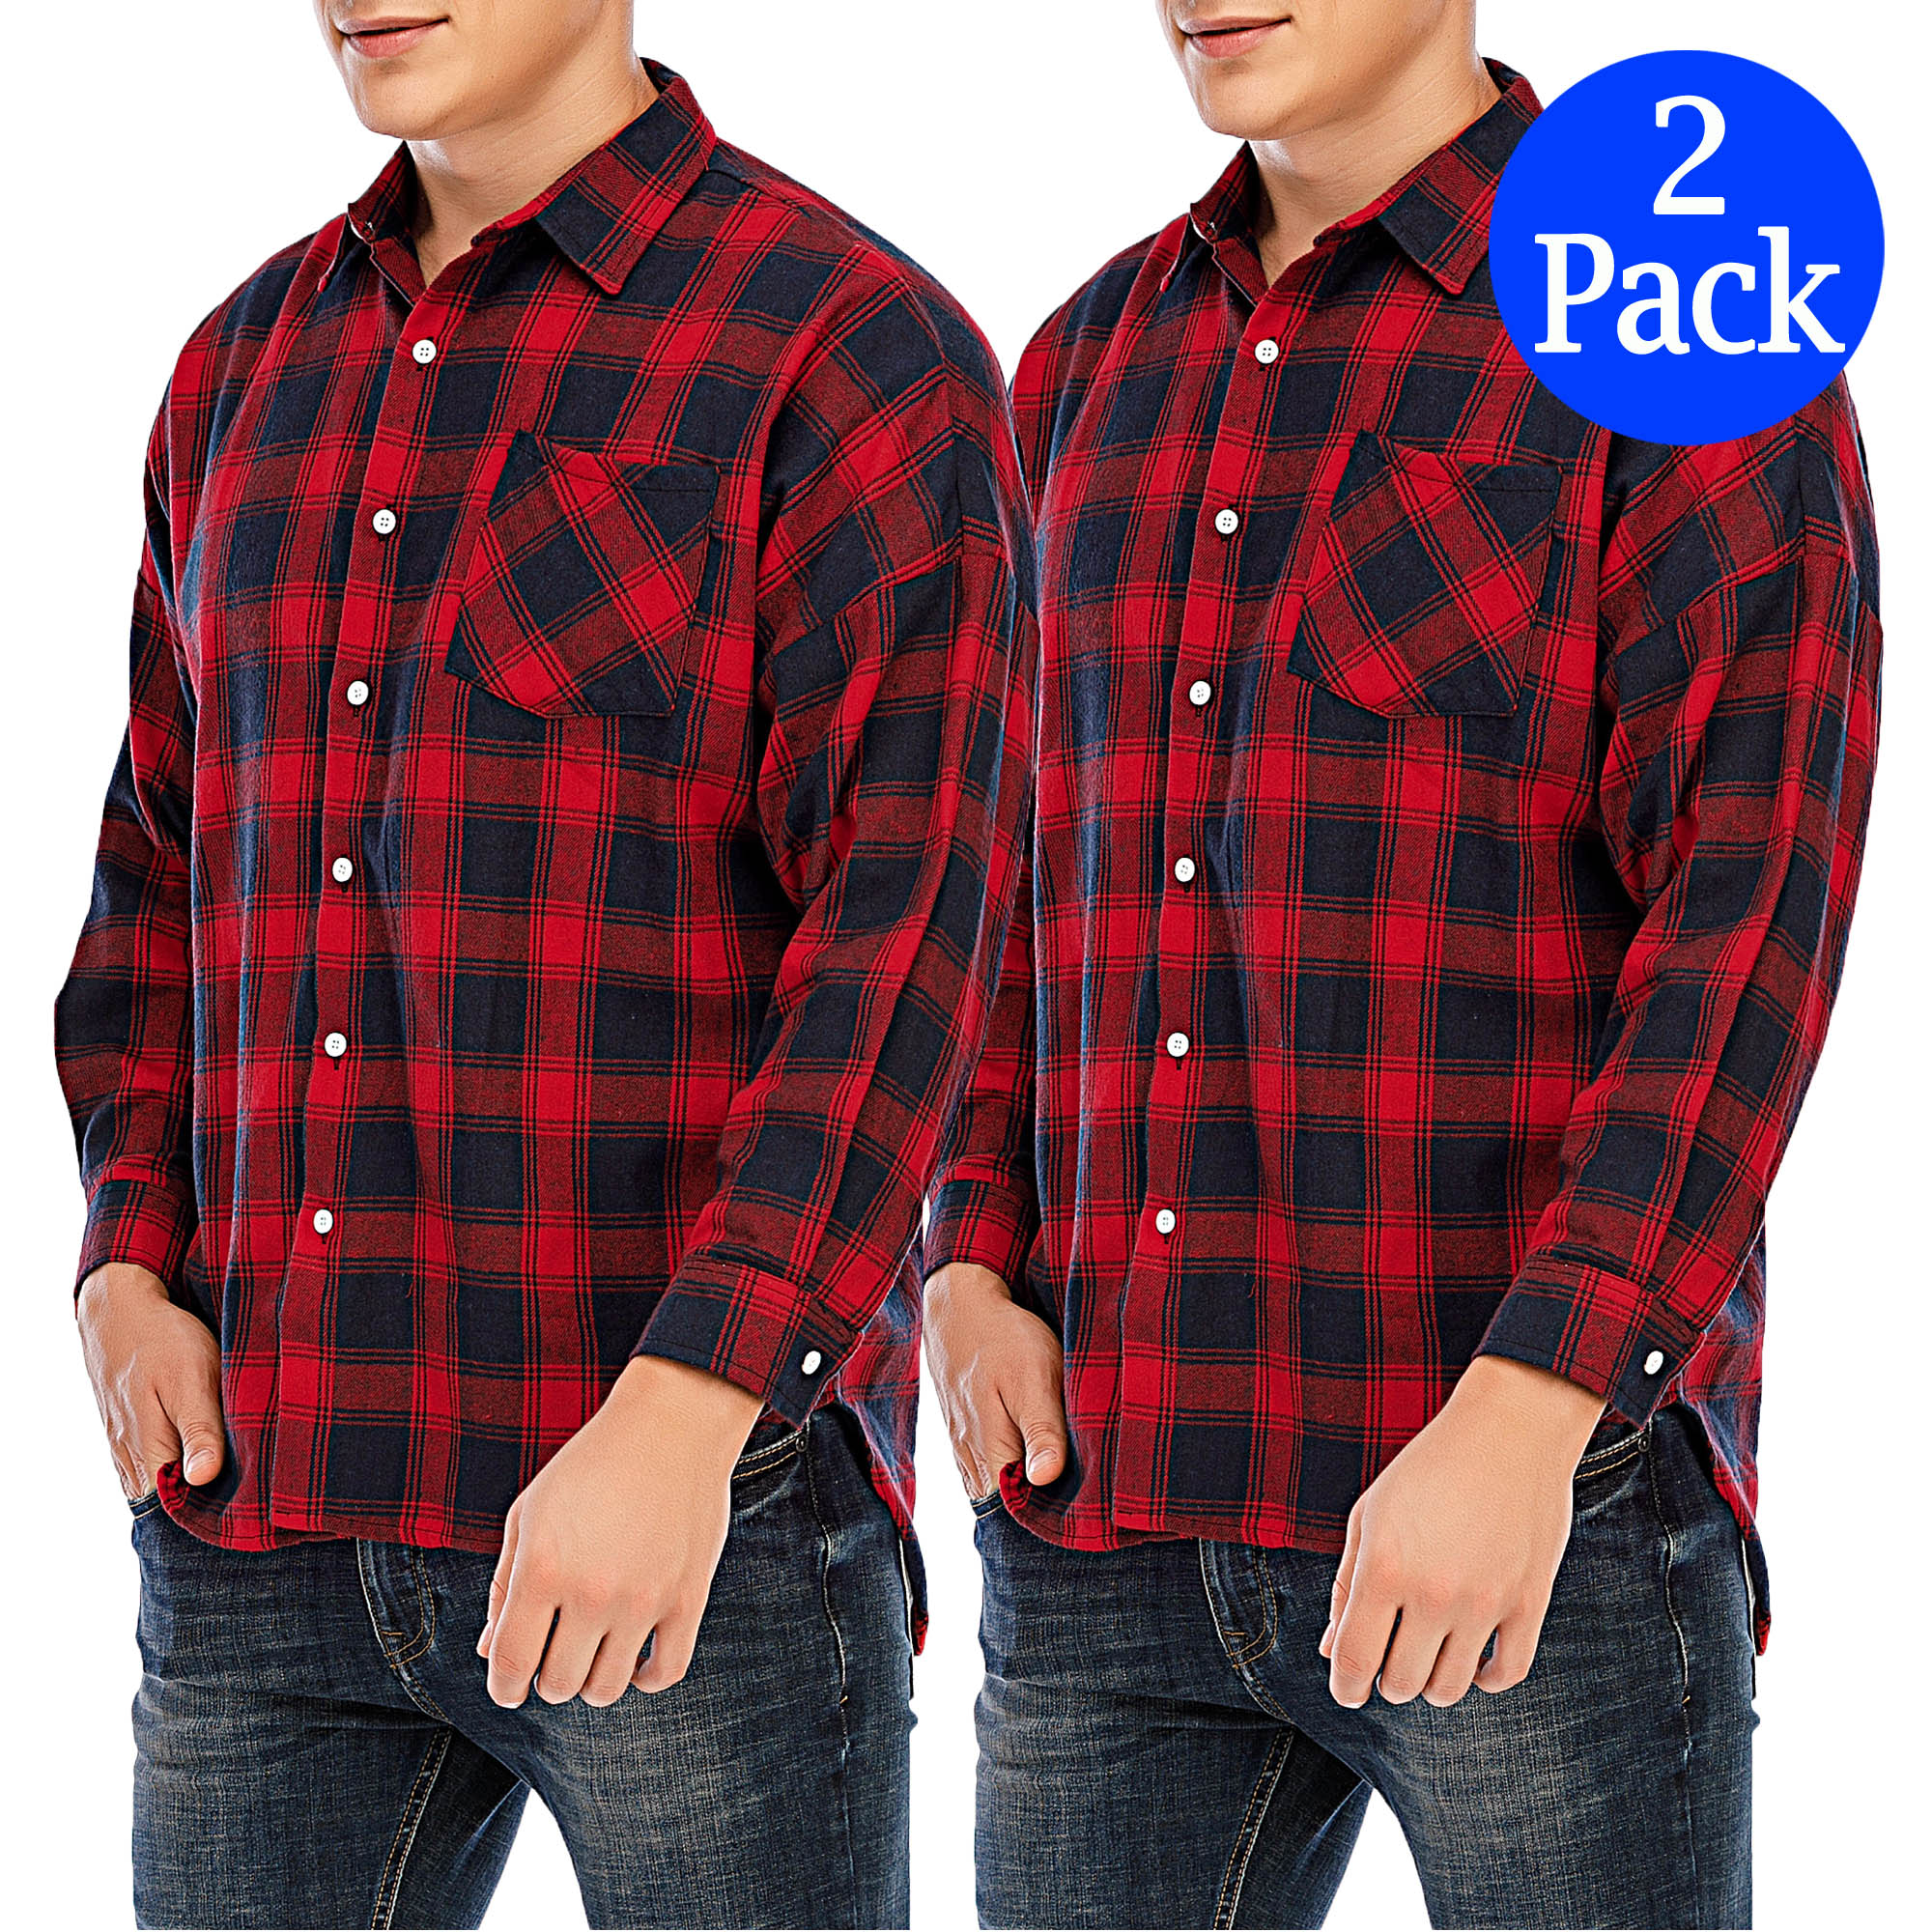 LELINTA 2 Pack Men's Dress Shirts Slim Fit Cotton Long Sleeve Plaid Shirt Casual Button Down Shirts for men - image 1 of 7